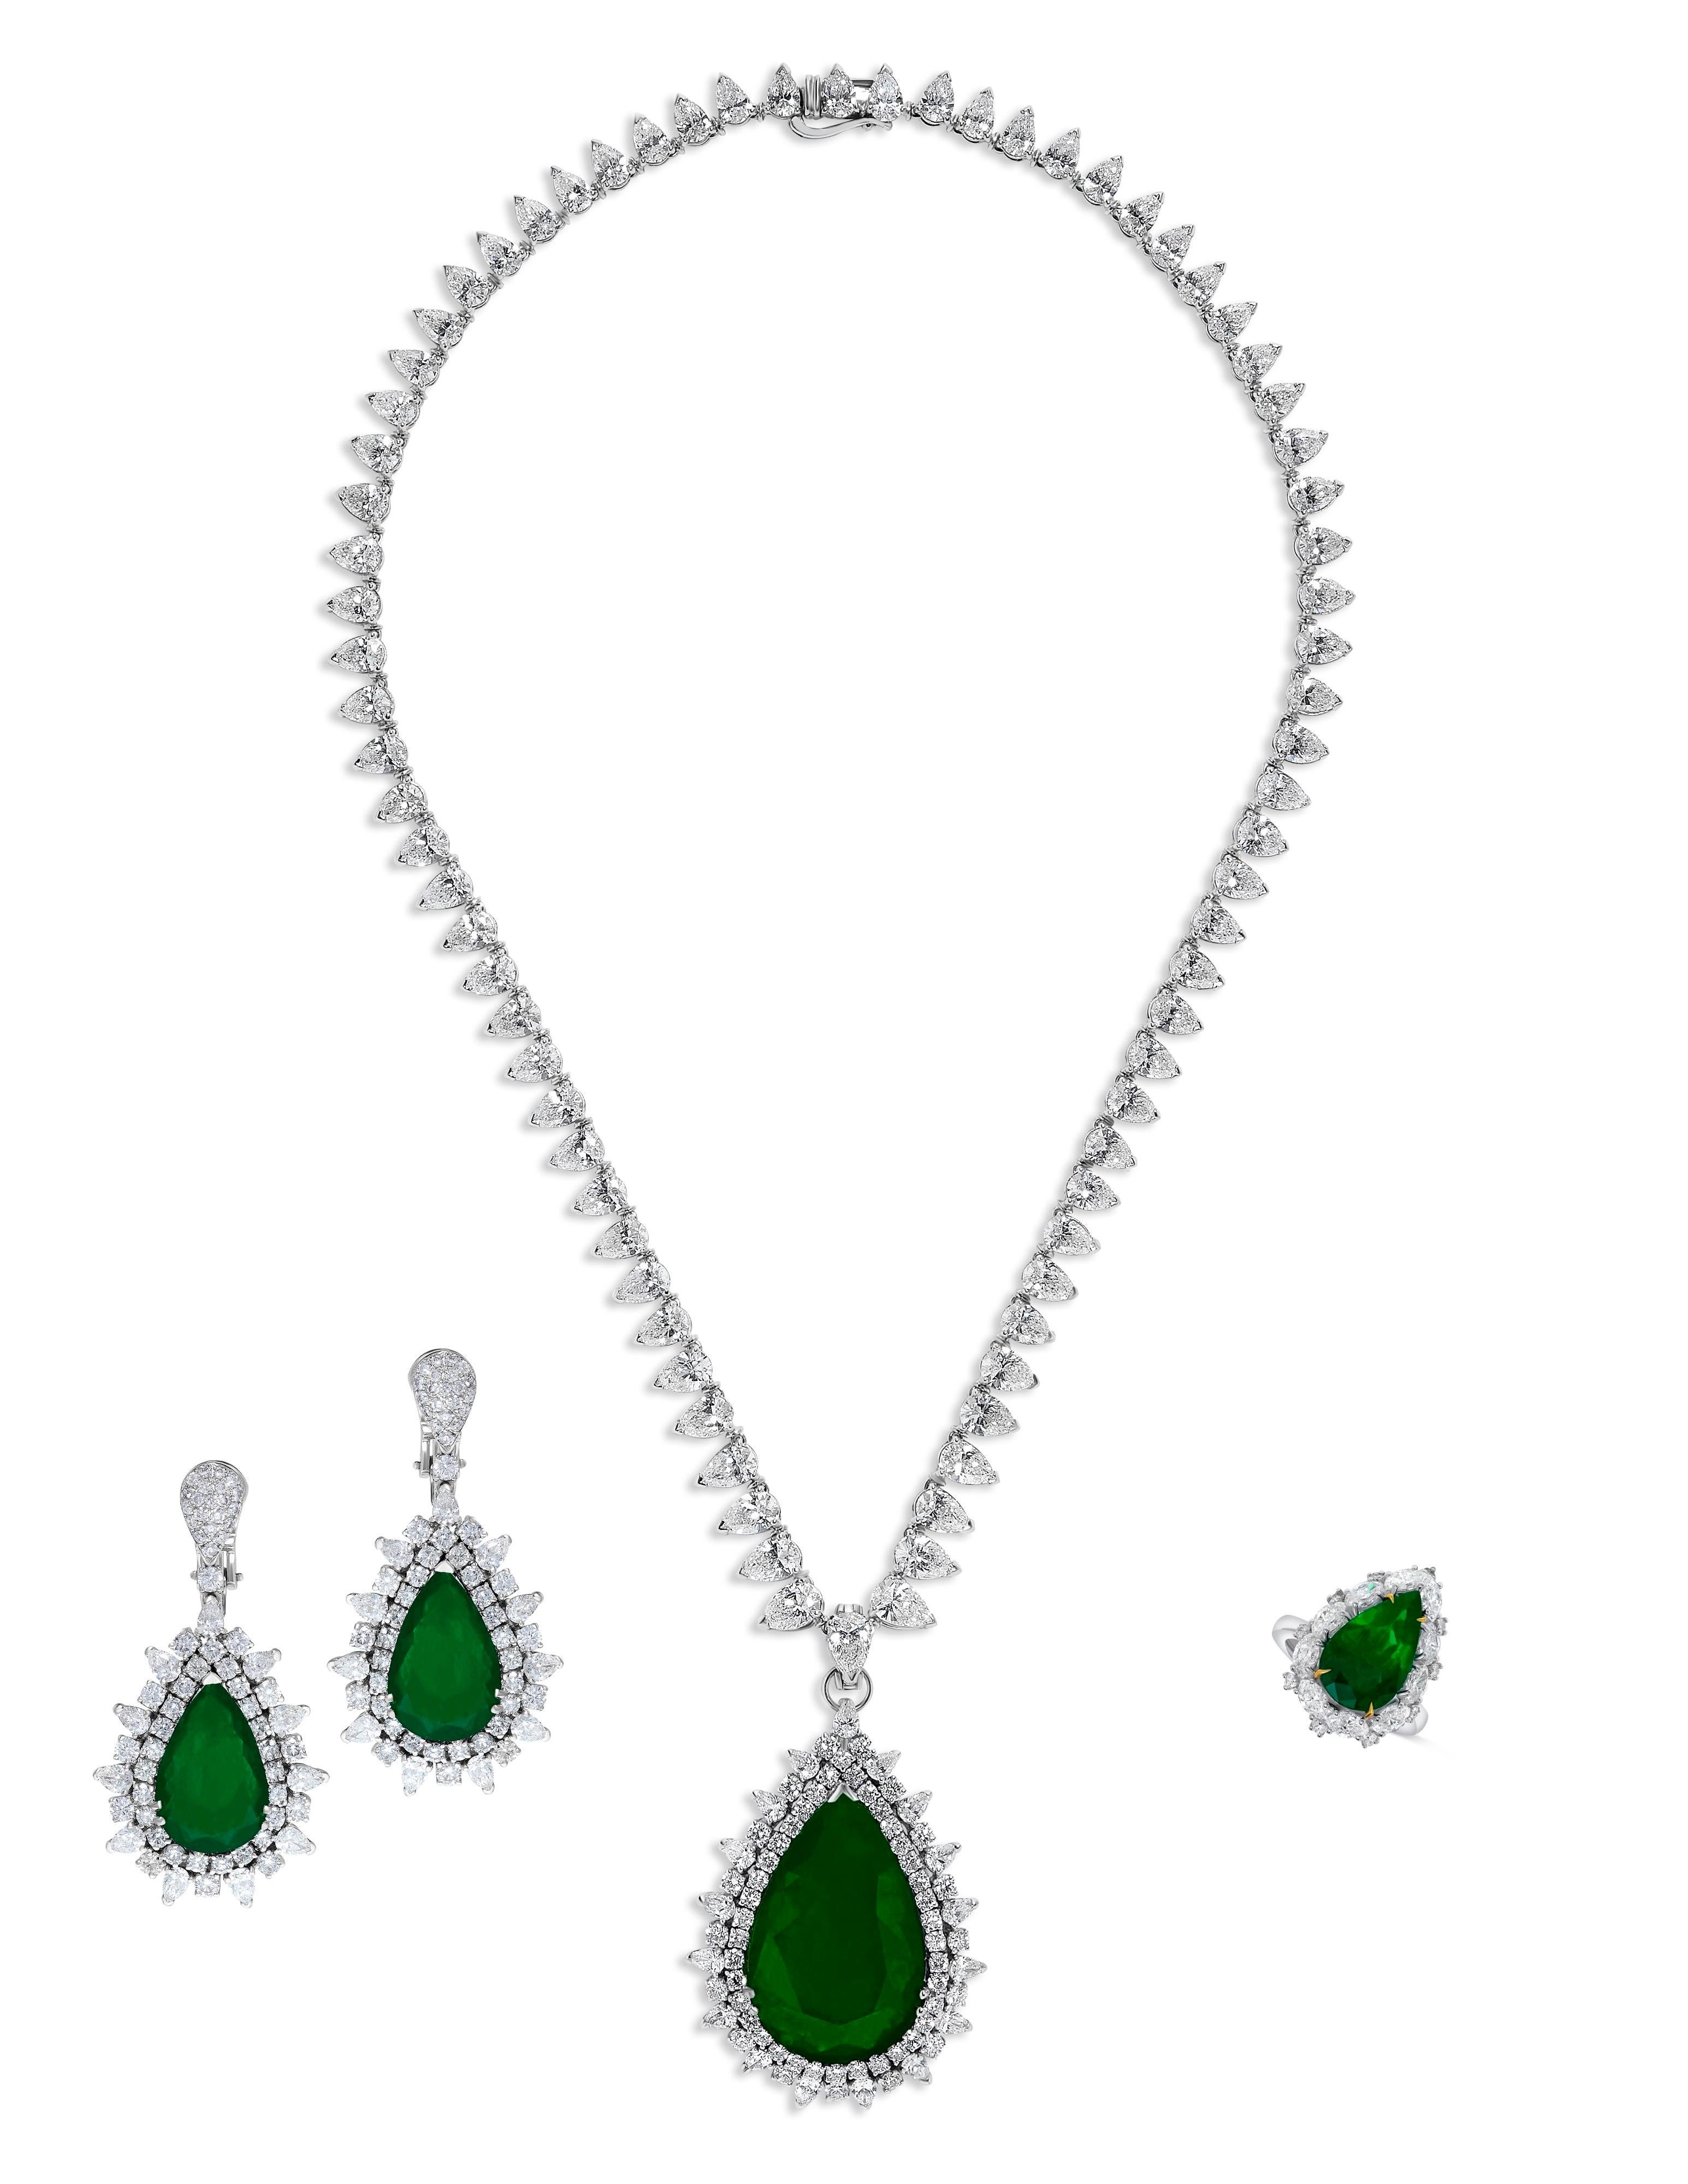 From the Museum Vault at Emilio Jewelry New York,
a Suite of the rarest and finest quality old mine Muzo Emeralds available. The emeralds are vivid green color and excellent transparency. Be the one and only! If you are interested in only one of the